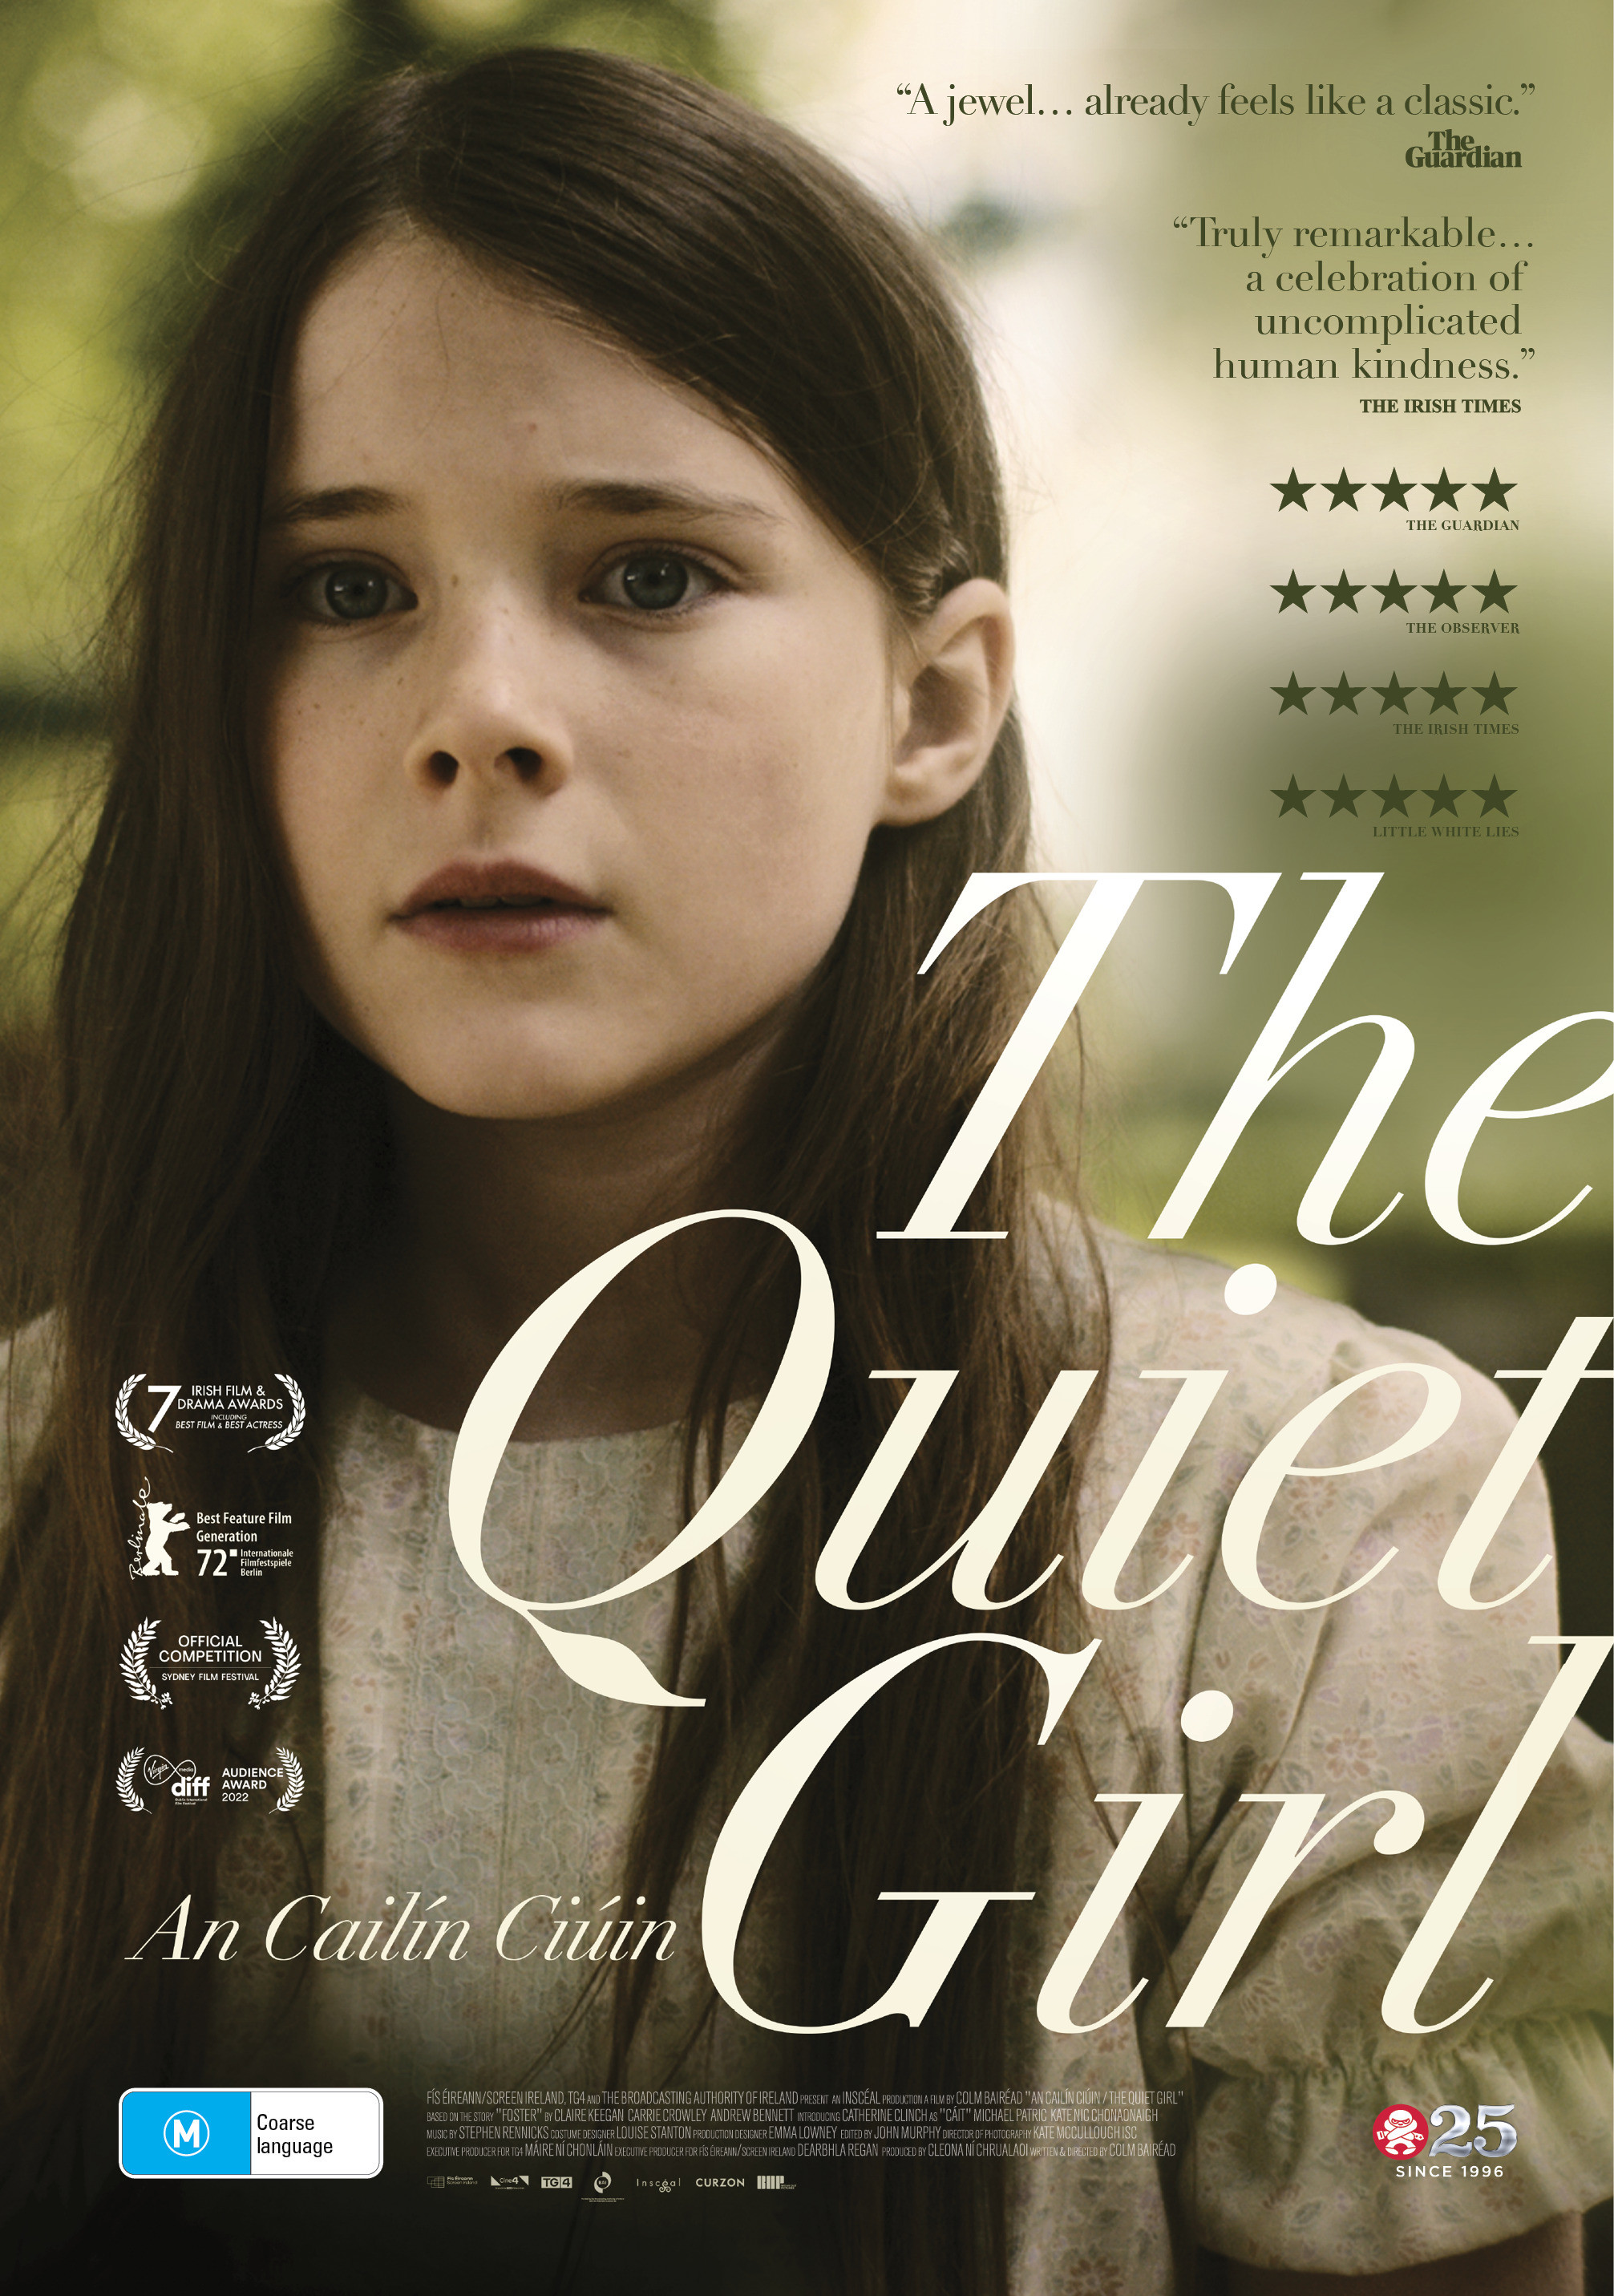 book review the quiet girl